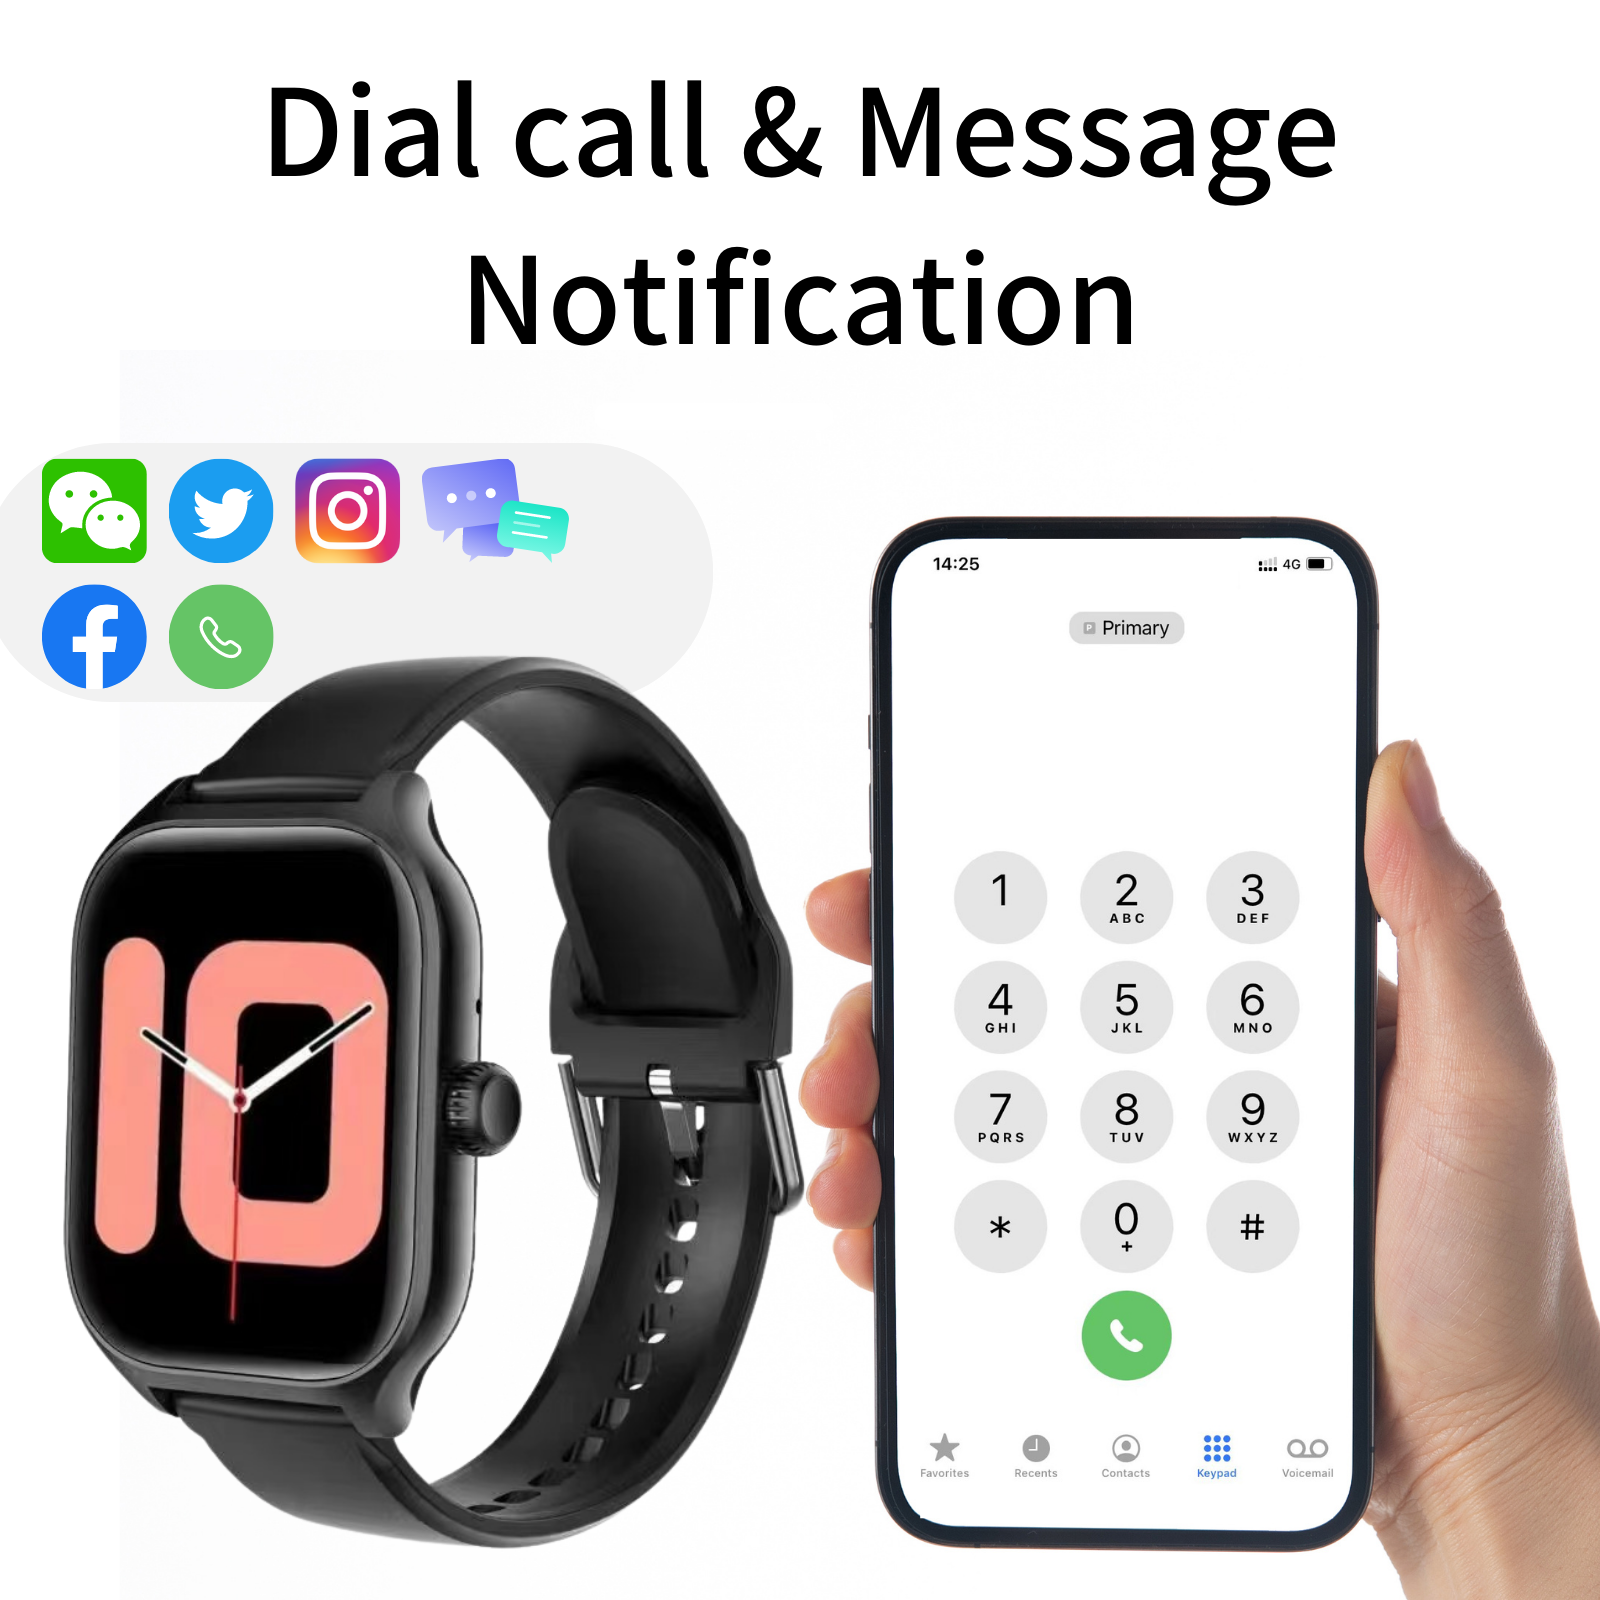 Dial call & Message Notification (1)